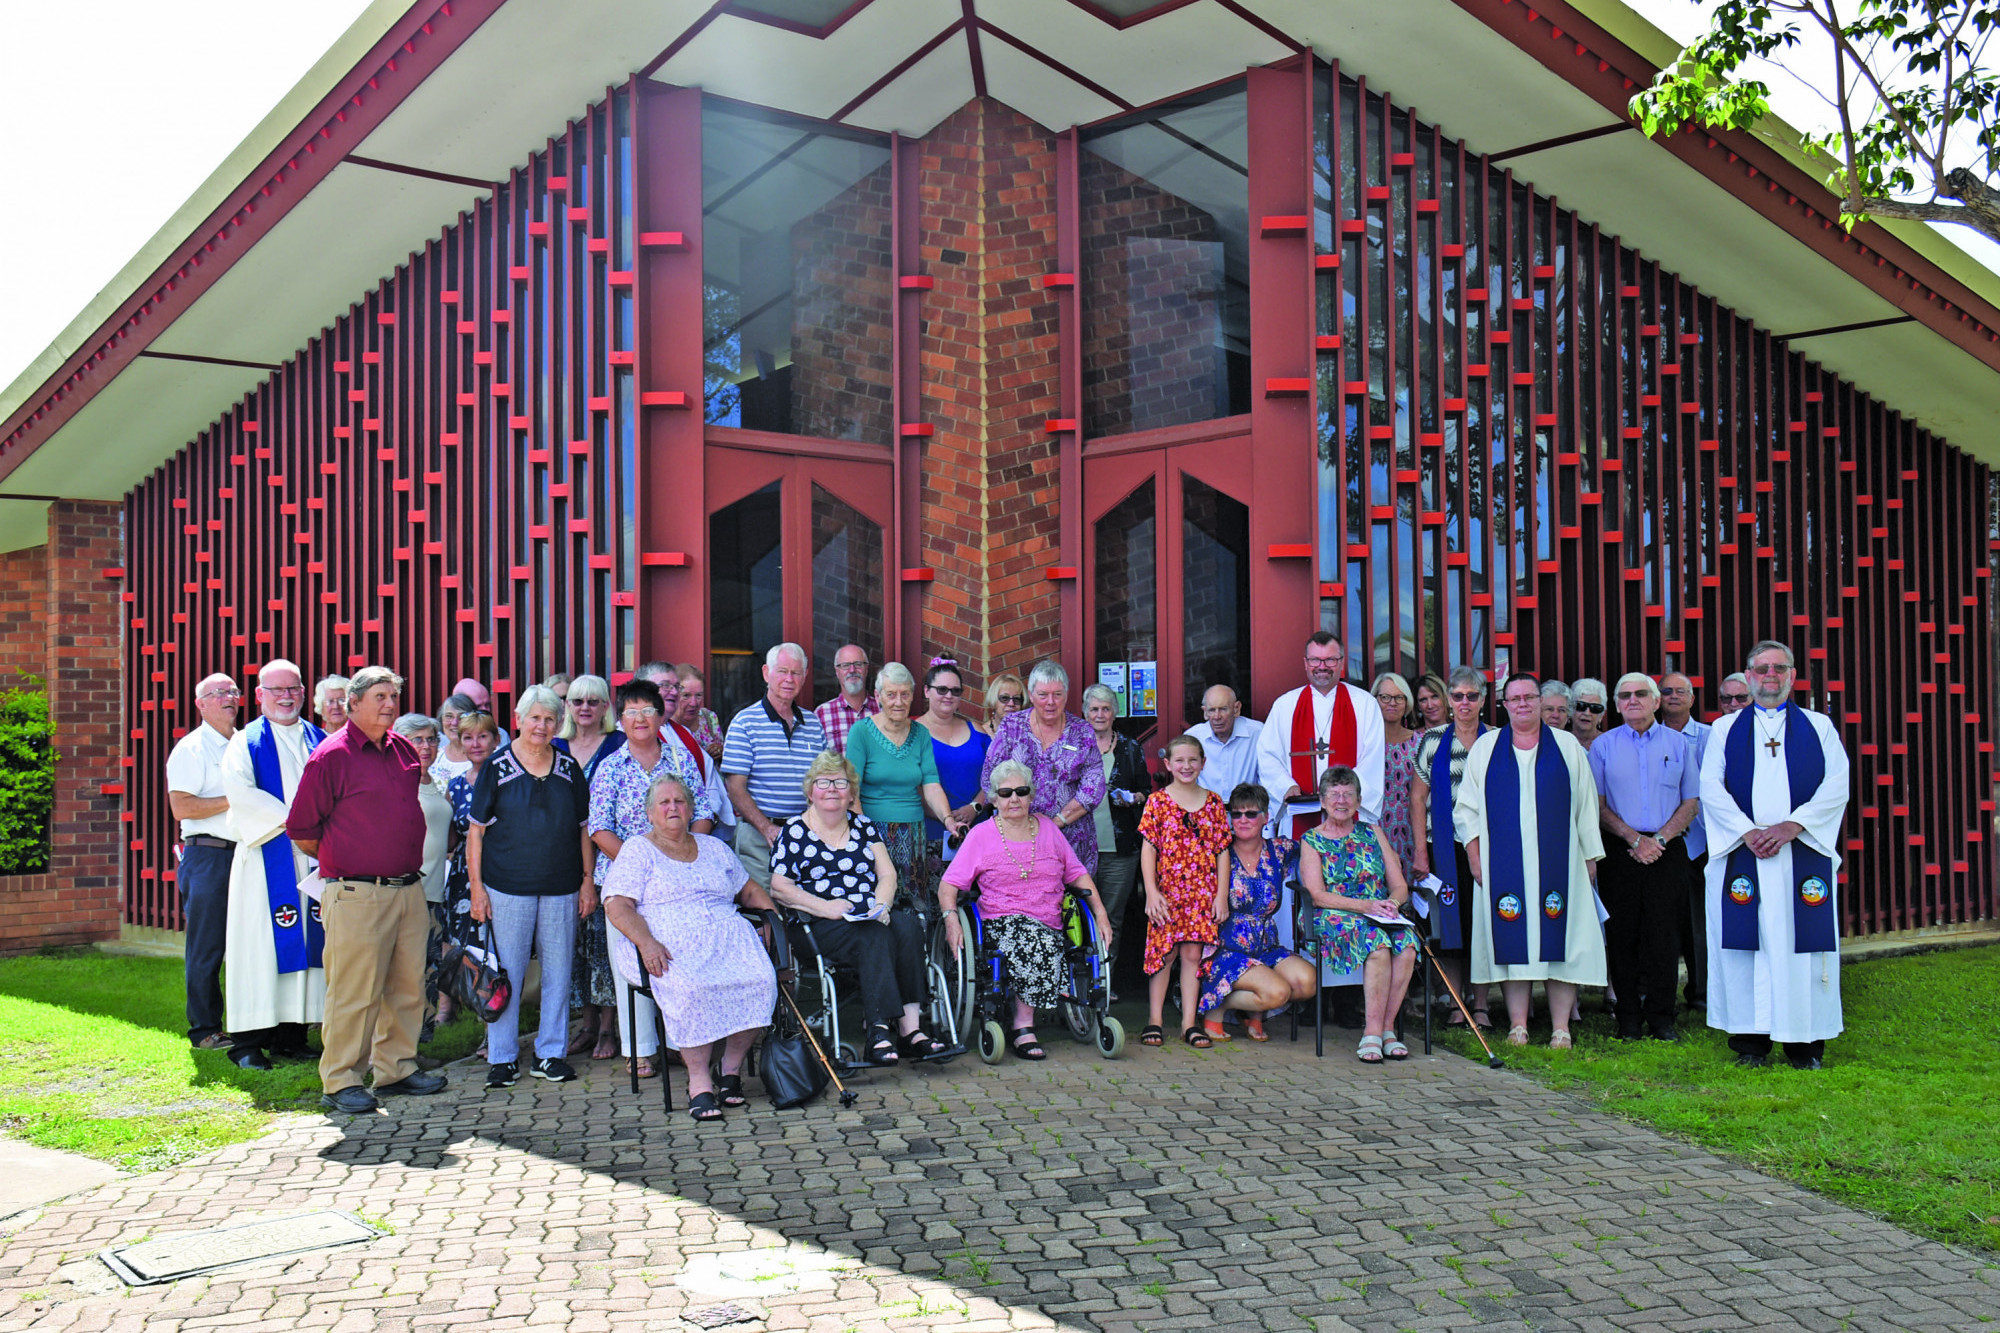 The last service at the historic Uniting Church in Mareeba was held on Sunday January 31.